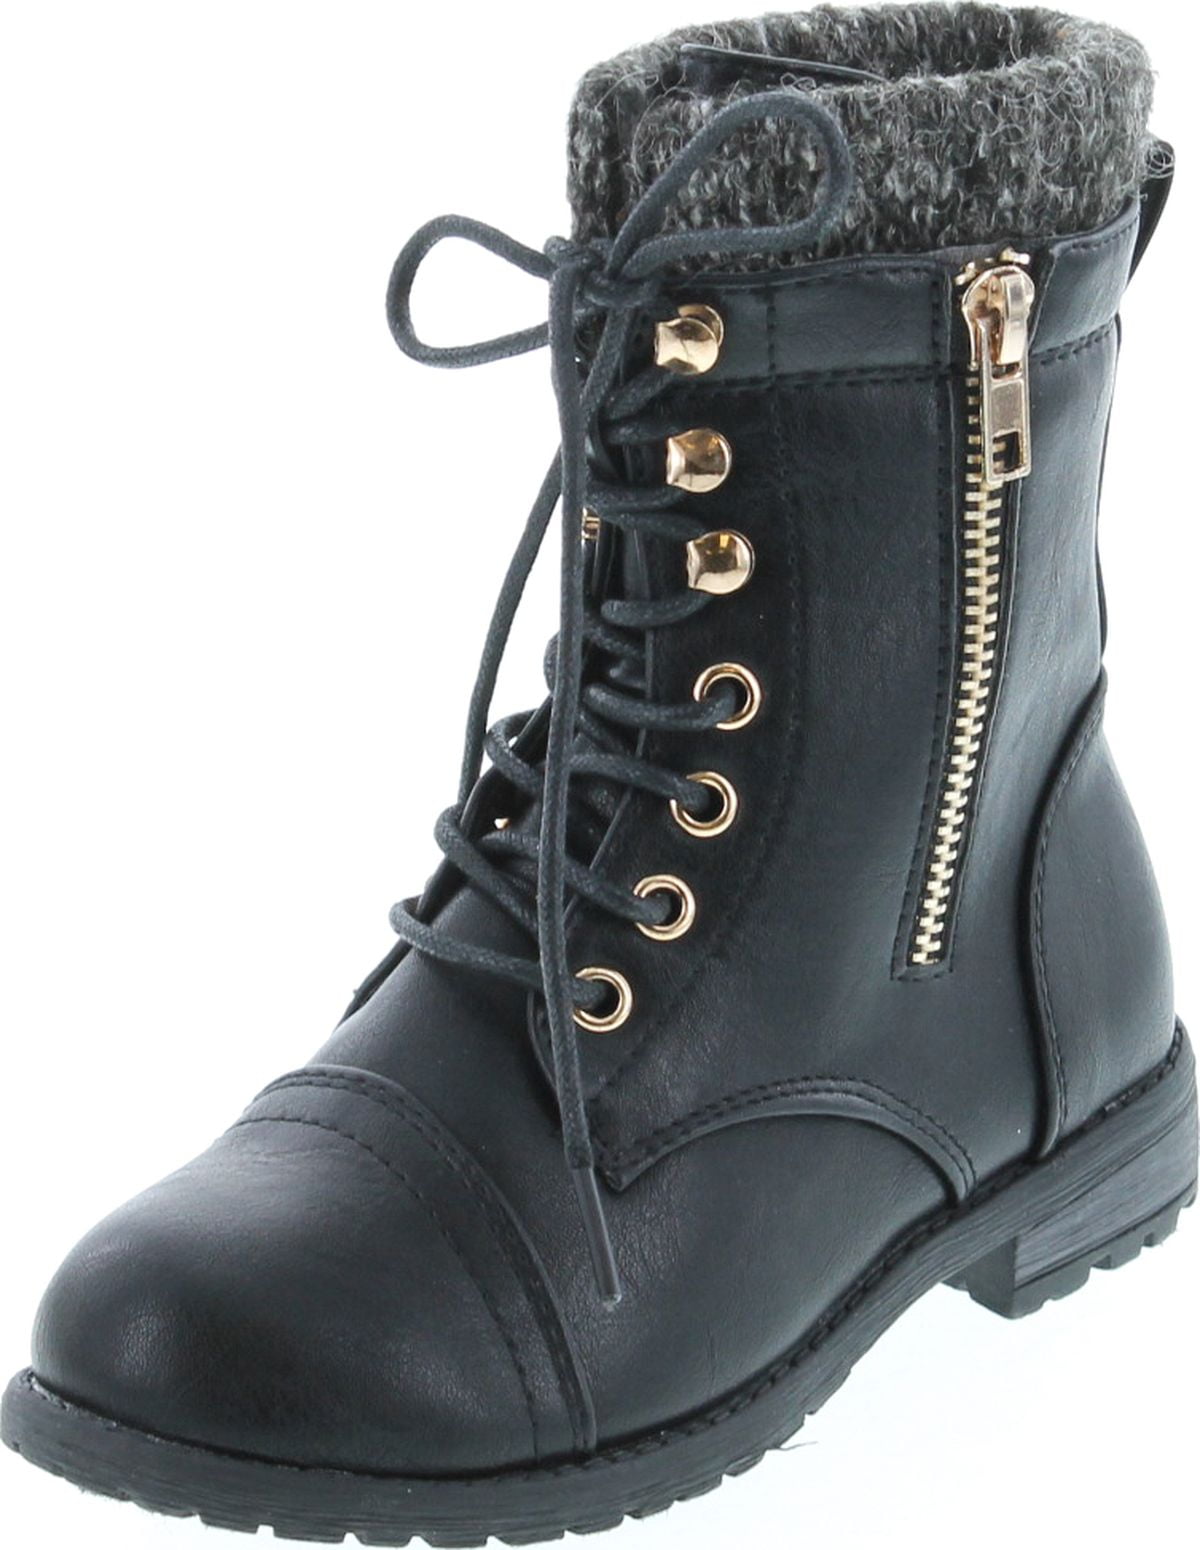 Black Lace Up Preschool Girls Booties Military Kids Ankle Boots Youth Shoes 